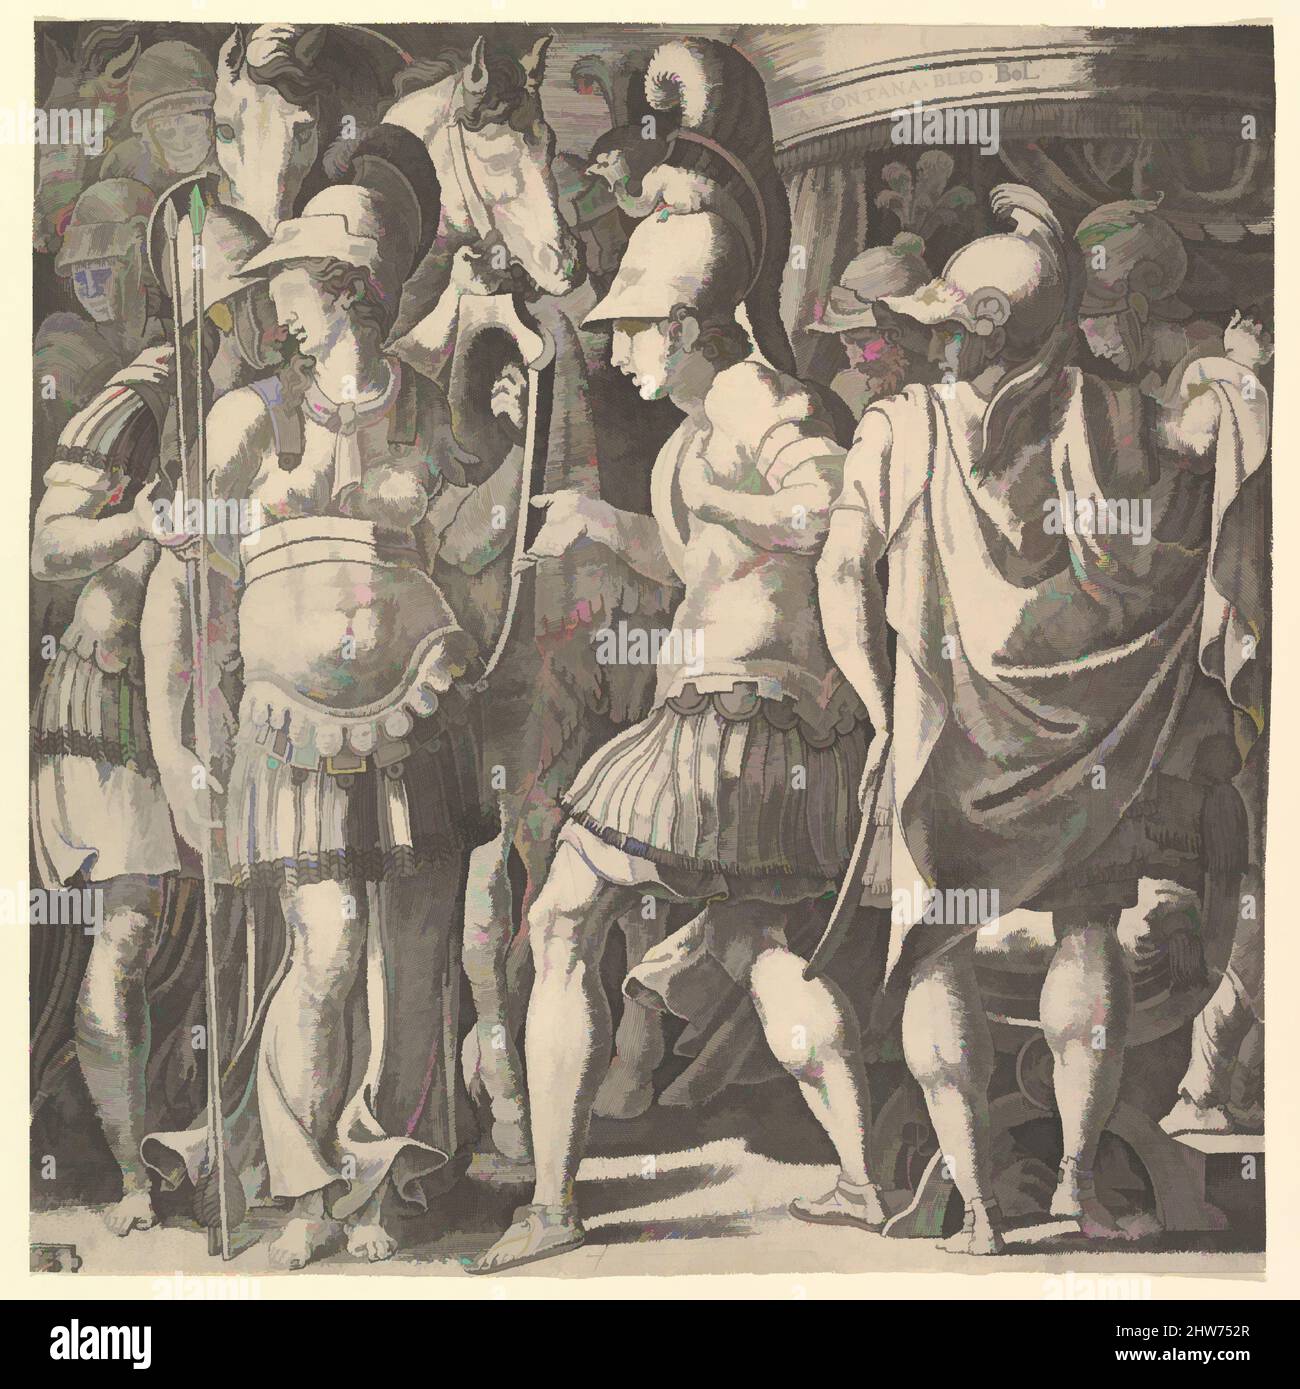 Art inspired by Alexander welcoming Thalestris and the Amazons, mid-16th century, Engraving, sheet: 9 7/16 x 9 7/16 in. (24 x 24 cm), Prints, Master FG (Italian, active mid-16th century), After Francesco Primaticcio (Italian, Bologna 1504/5–1570 Paris, Classic works modernized by Artotop with a splash of modernity. Shapes, color and value, eye-catching visual impact on art. Emotions through freedom of artworks in a contemporary way. A timeless message pursuing a wildly creative new direction. Artists turning to the digital medium and creating the Artotop NFT Stock Photo